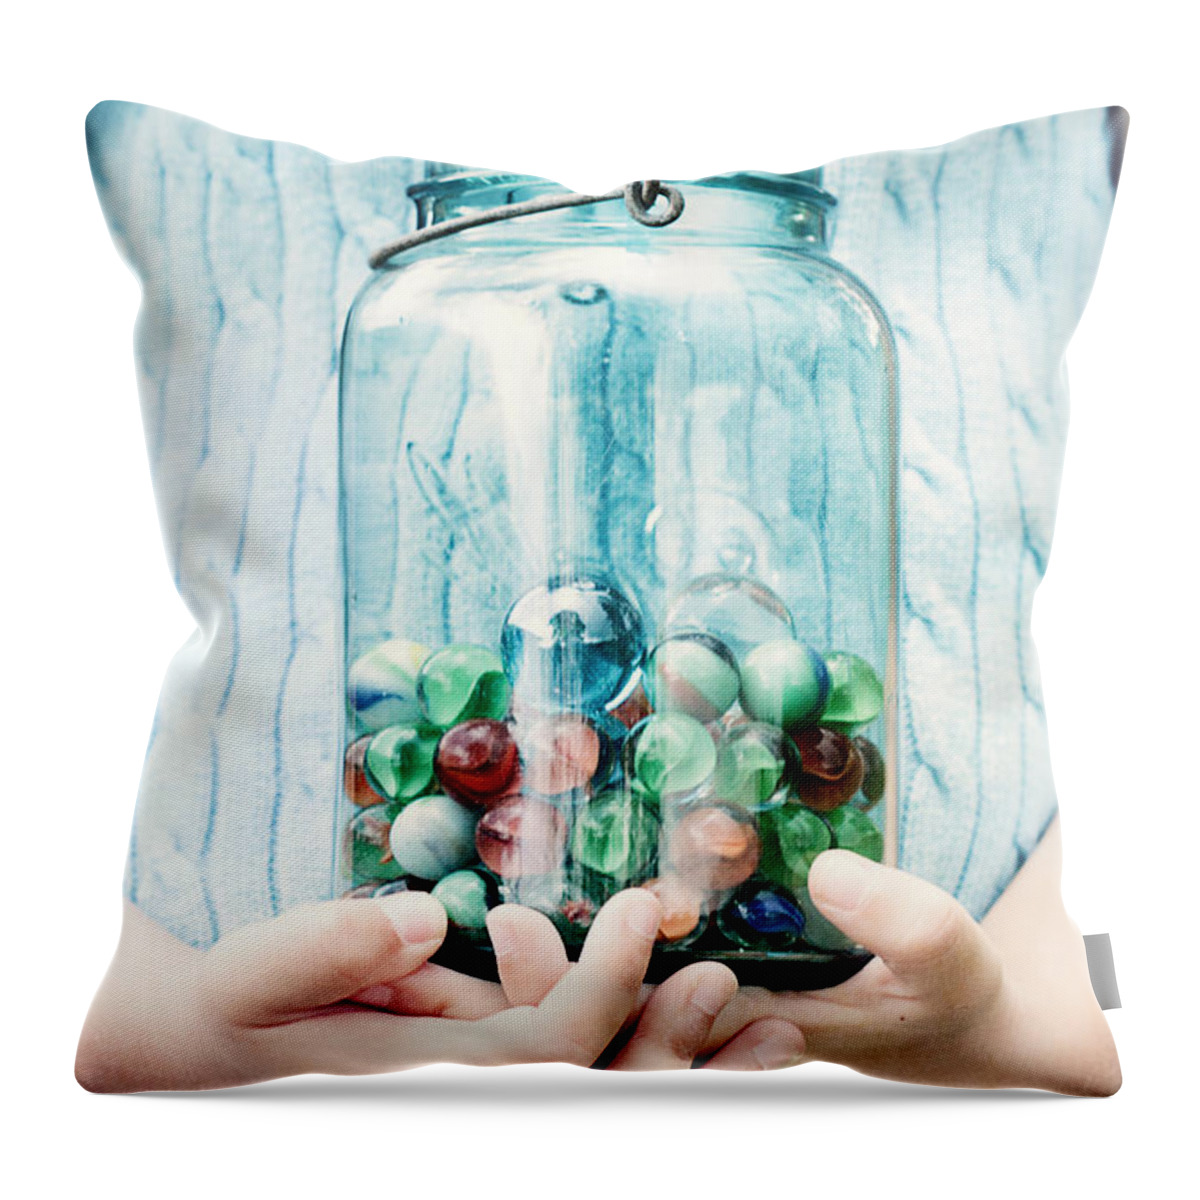 Ball Throw Pillow featuring the photograph The Marble Collection by Stephanie Frey